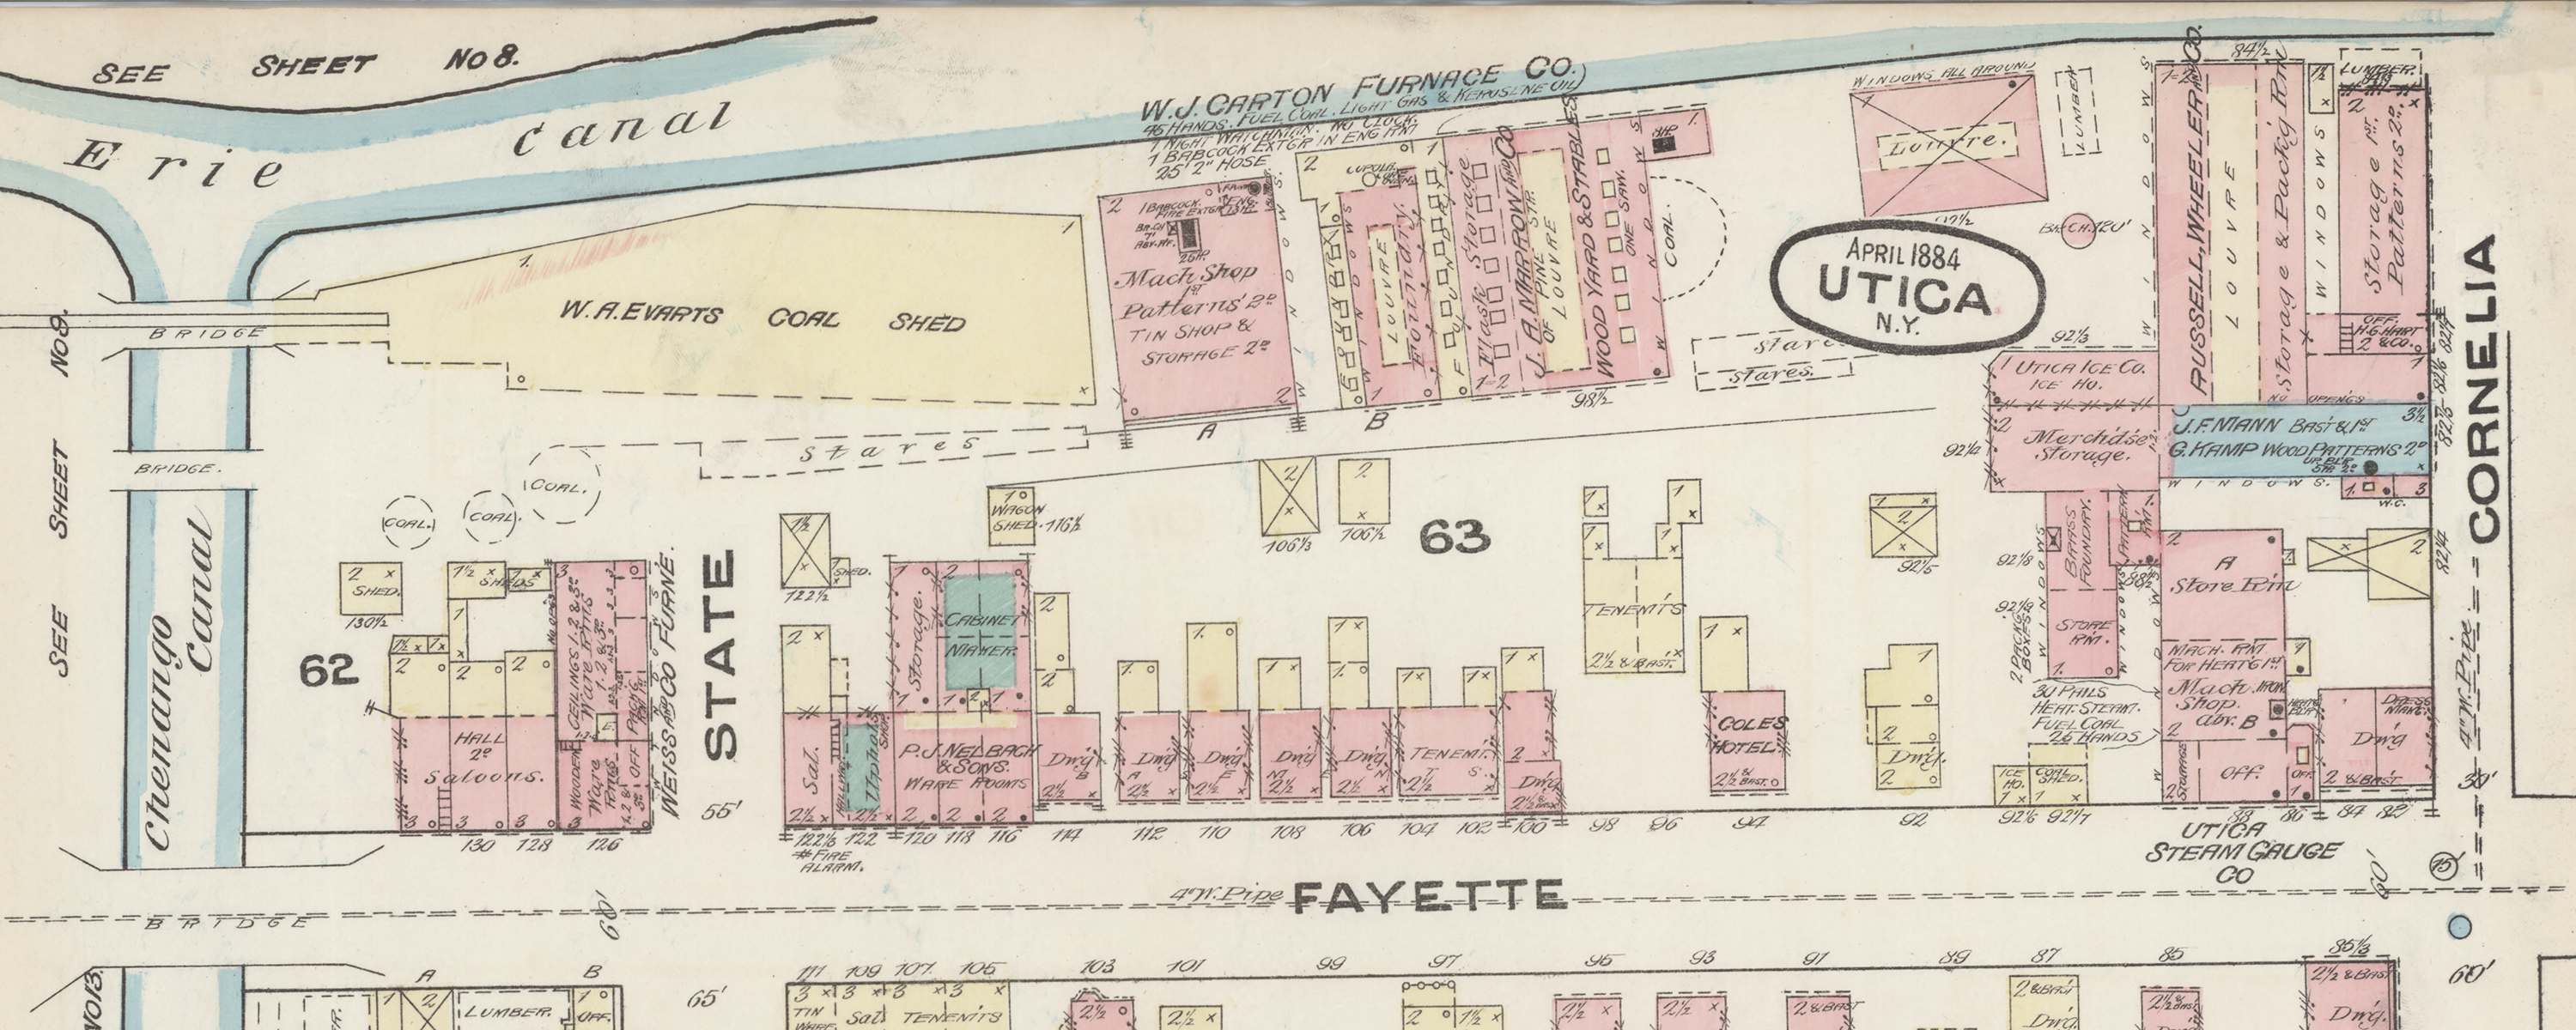 1883 UTICA NEW YORK POLICE STATION FAYETTE ST TO COURT ST ATLAS MAP CITY HALL 